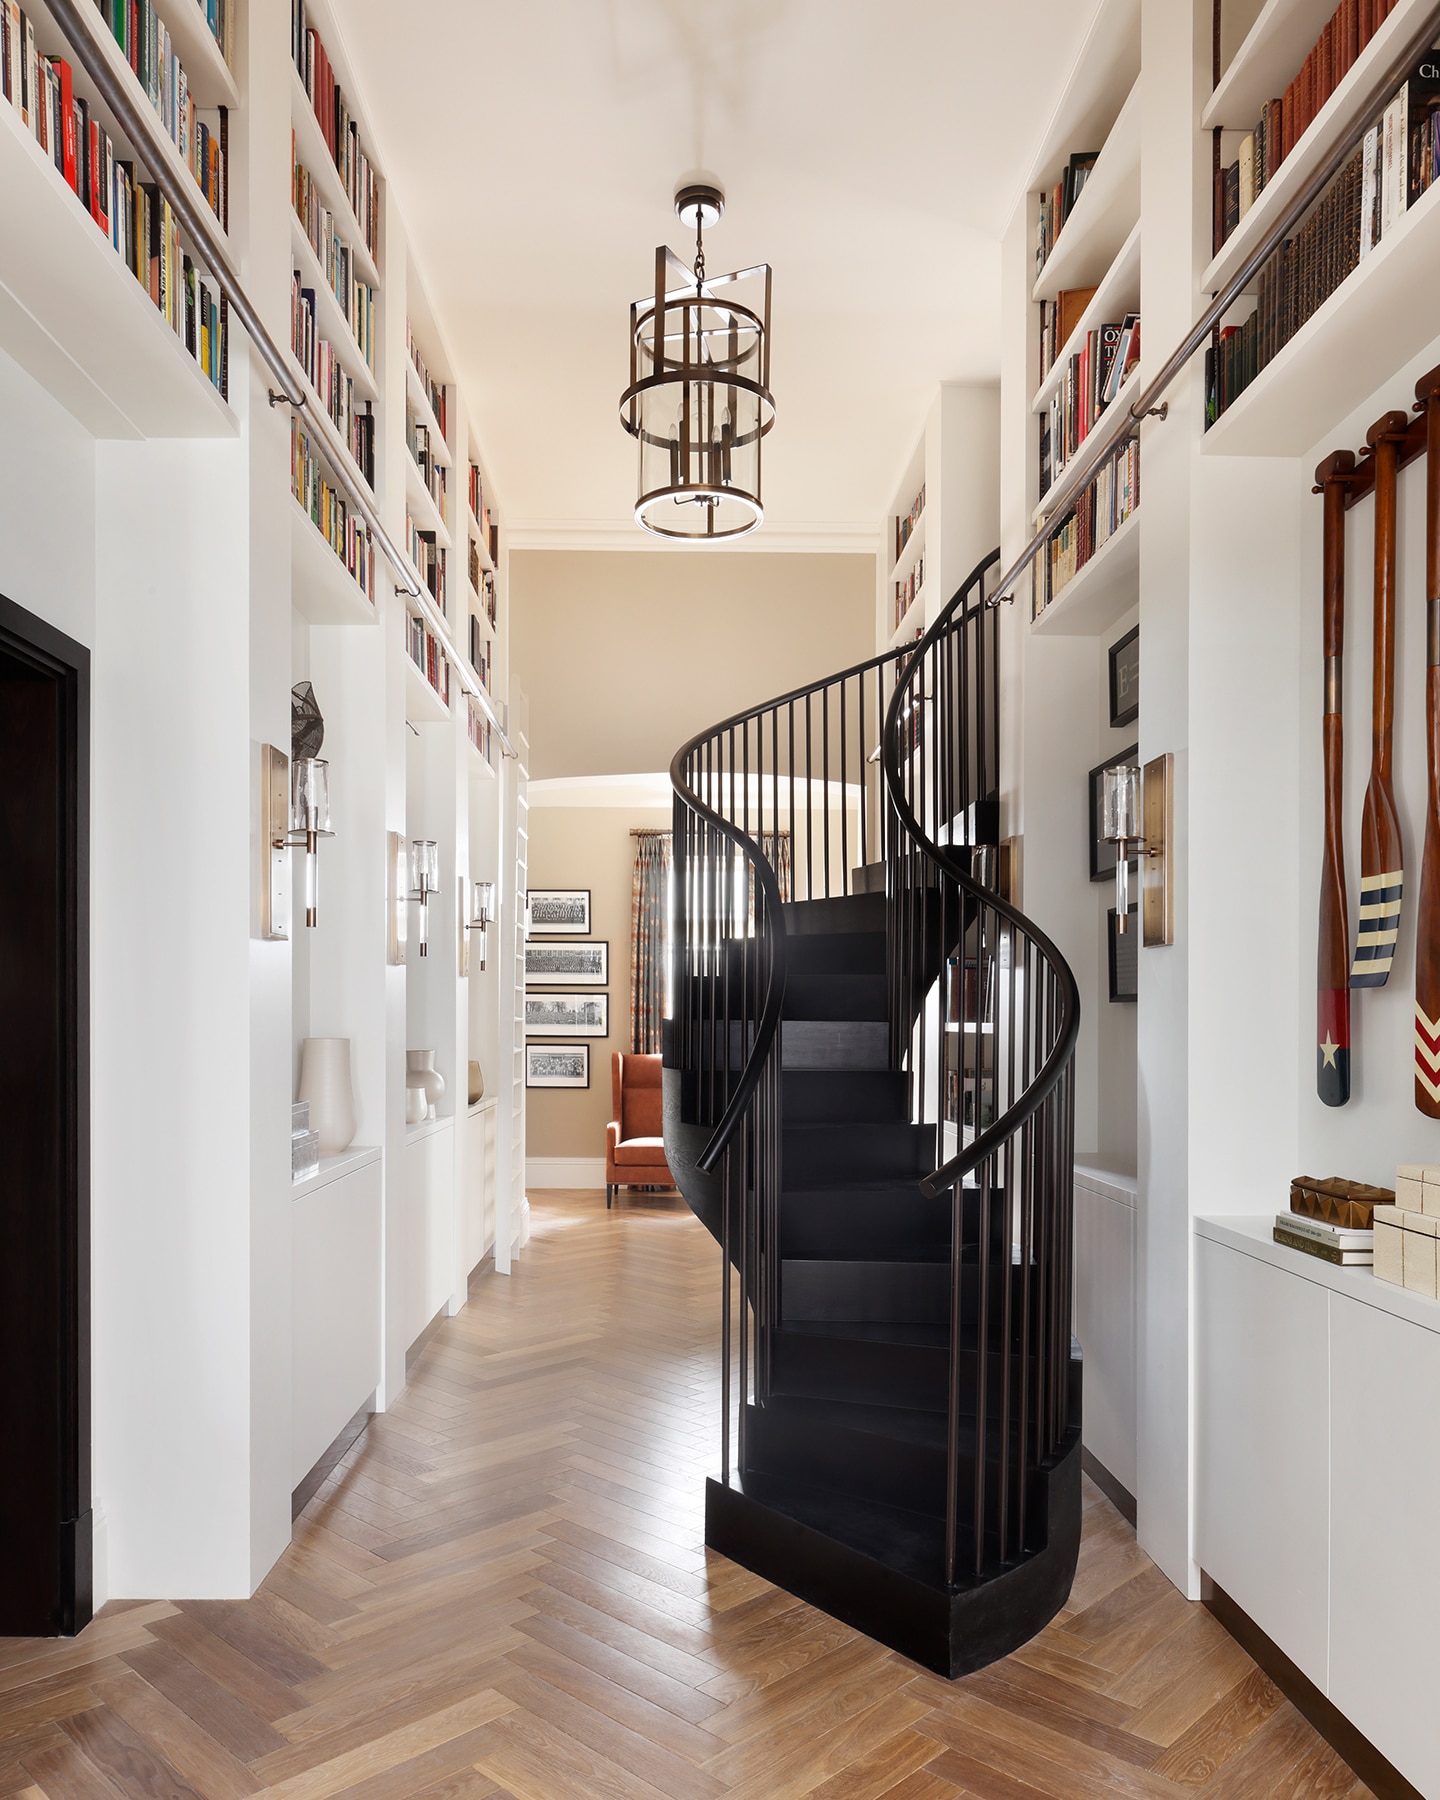 Spiral staircase and large bookshelves lining walls.